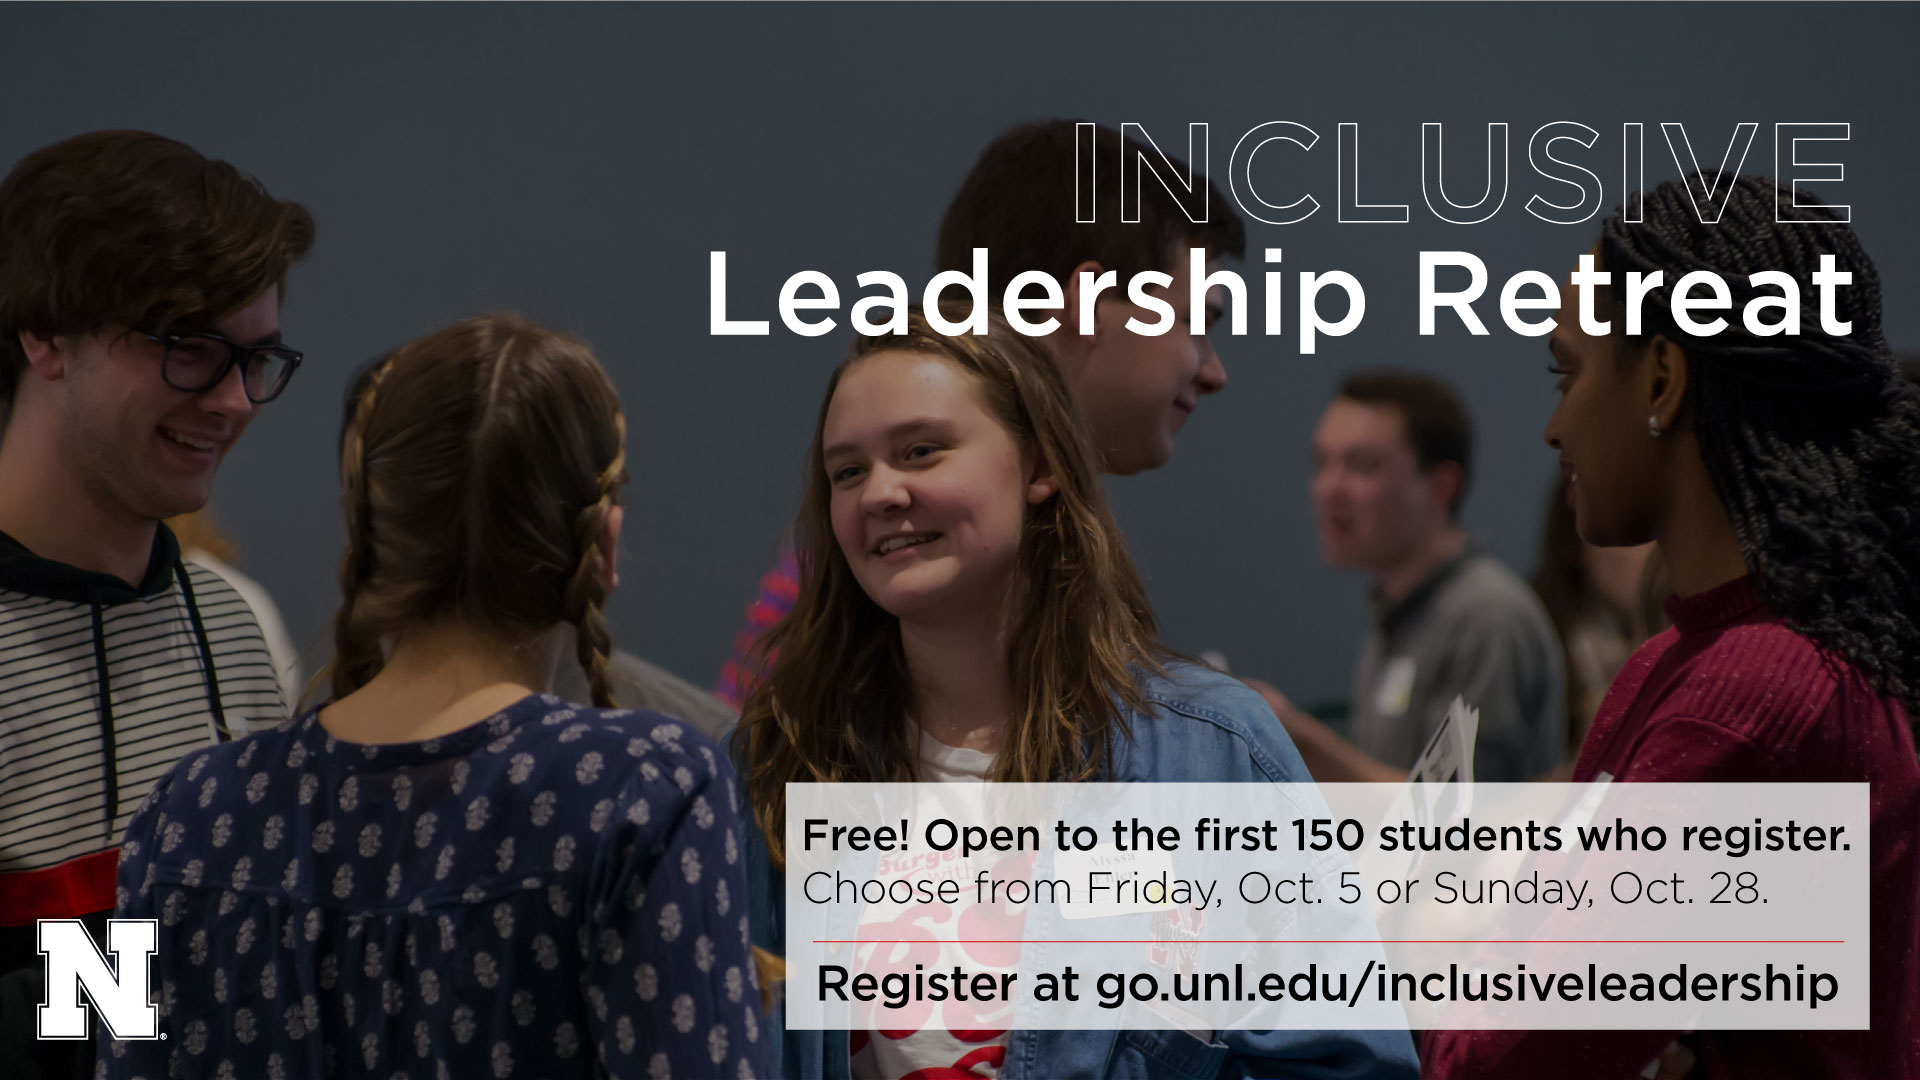 Nebraska students are invited to participate in the Inclusive Leadership Retreats on Friday, October 5 or Sunday, October 28.